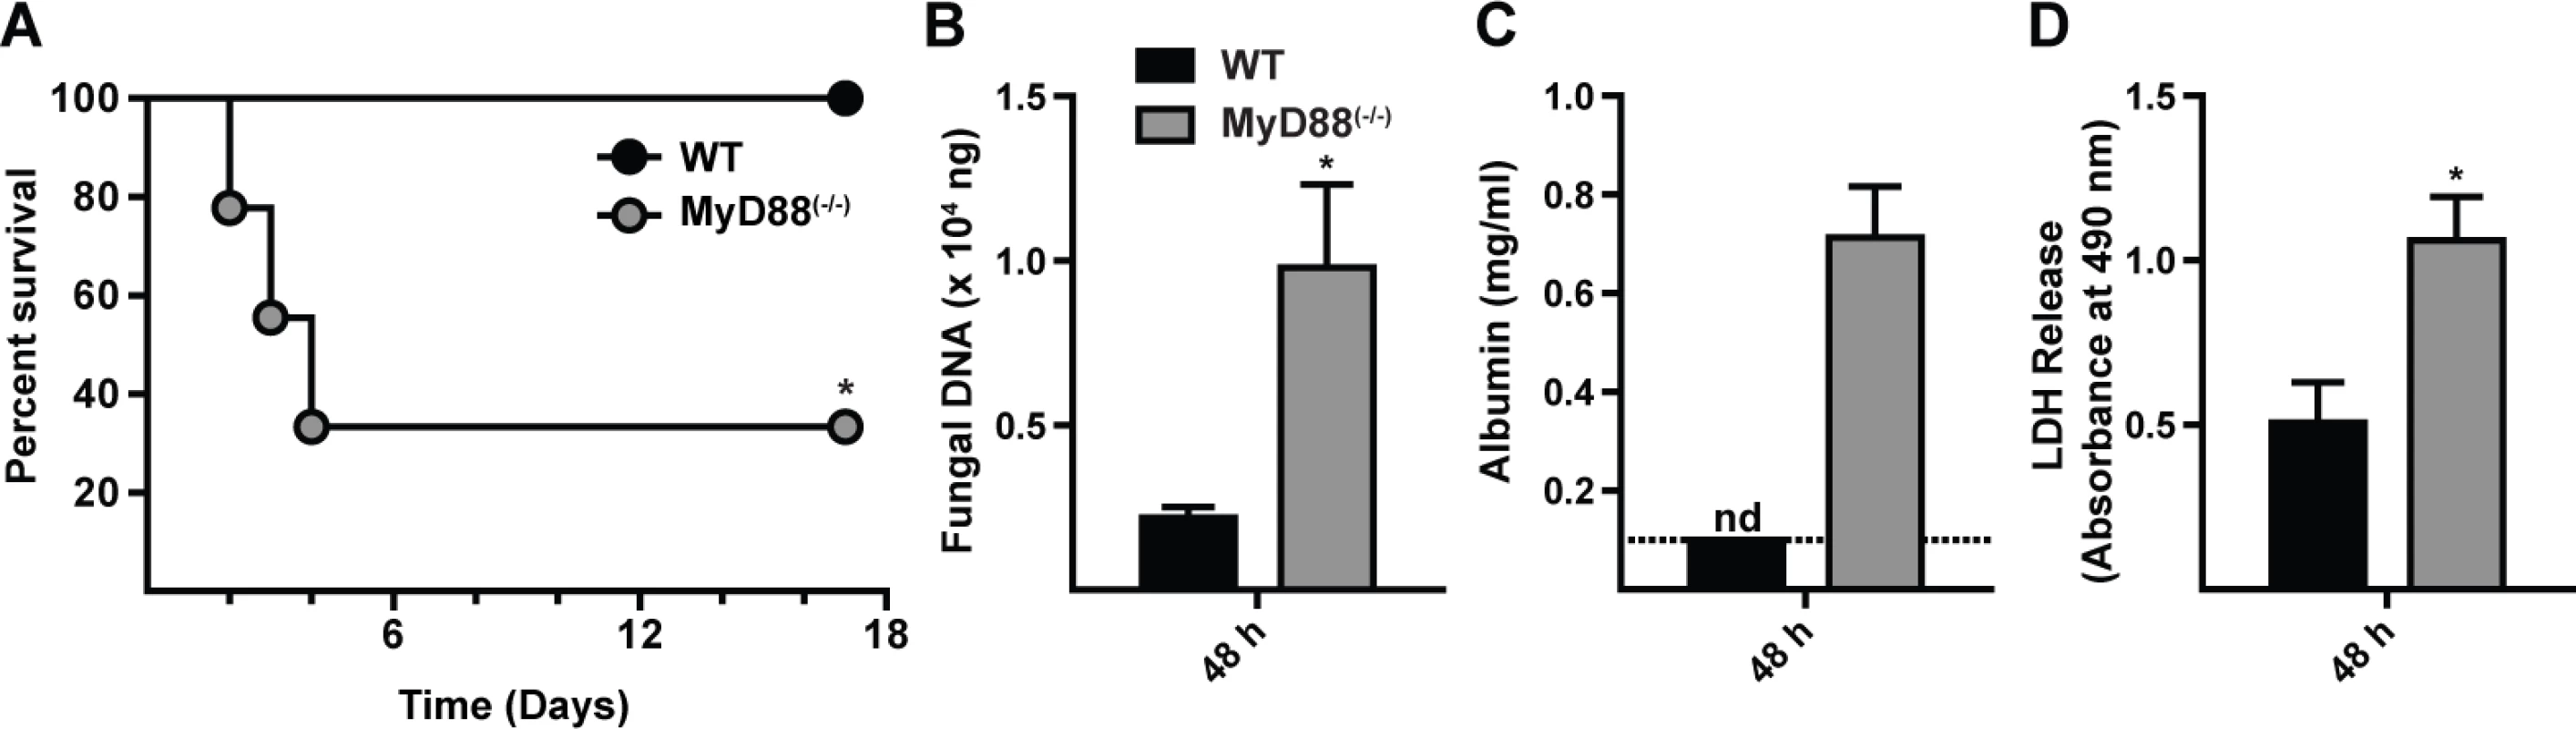 MyD88 is critical for survival, fungal clearance, and lung integrity during <i>A. fumigatus</i> challenge.